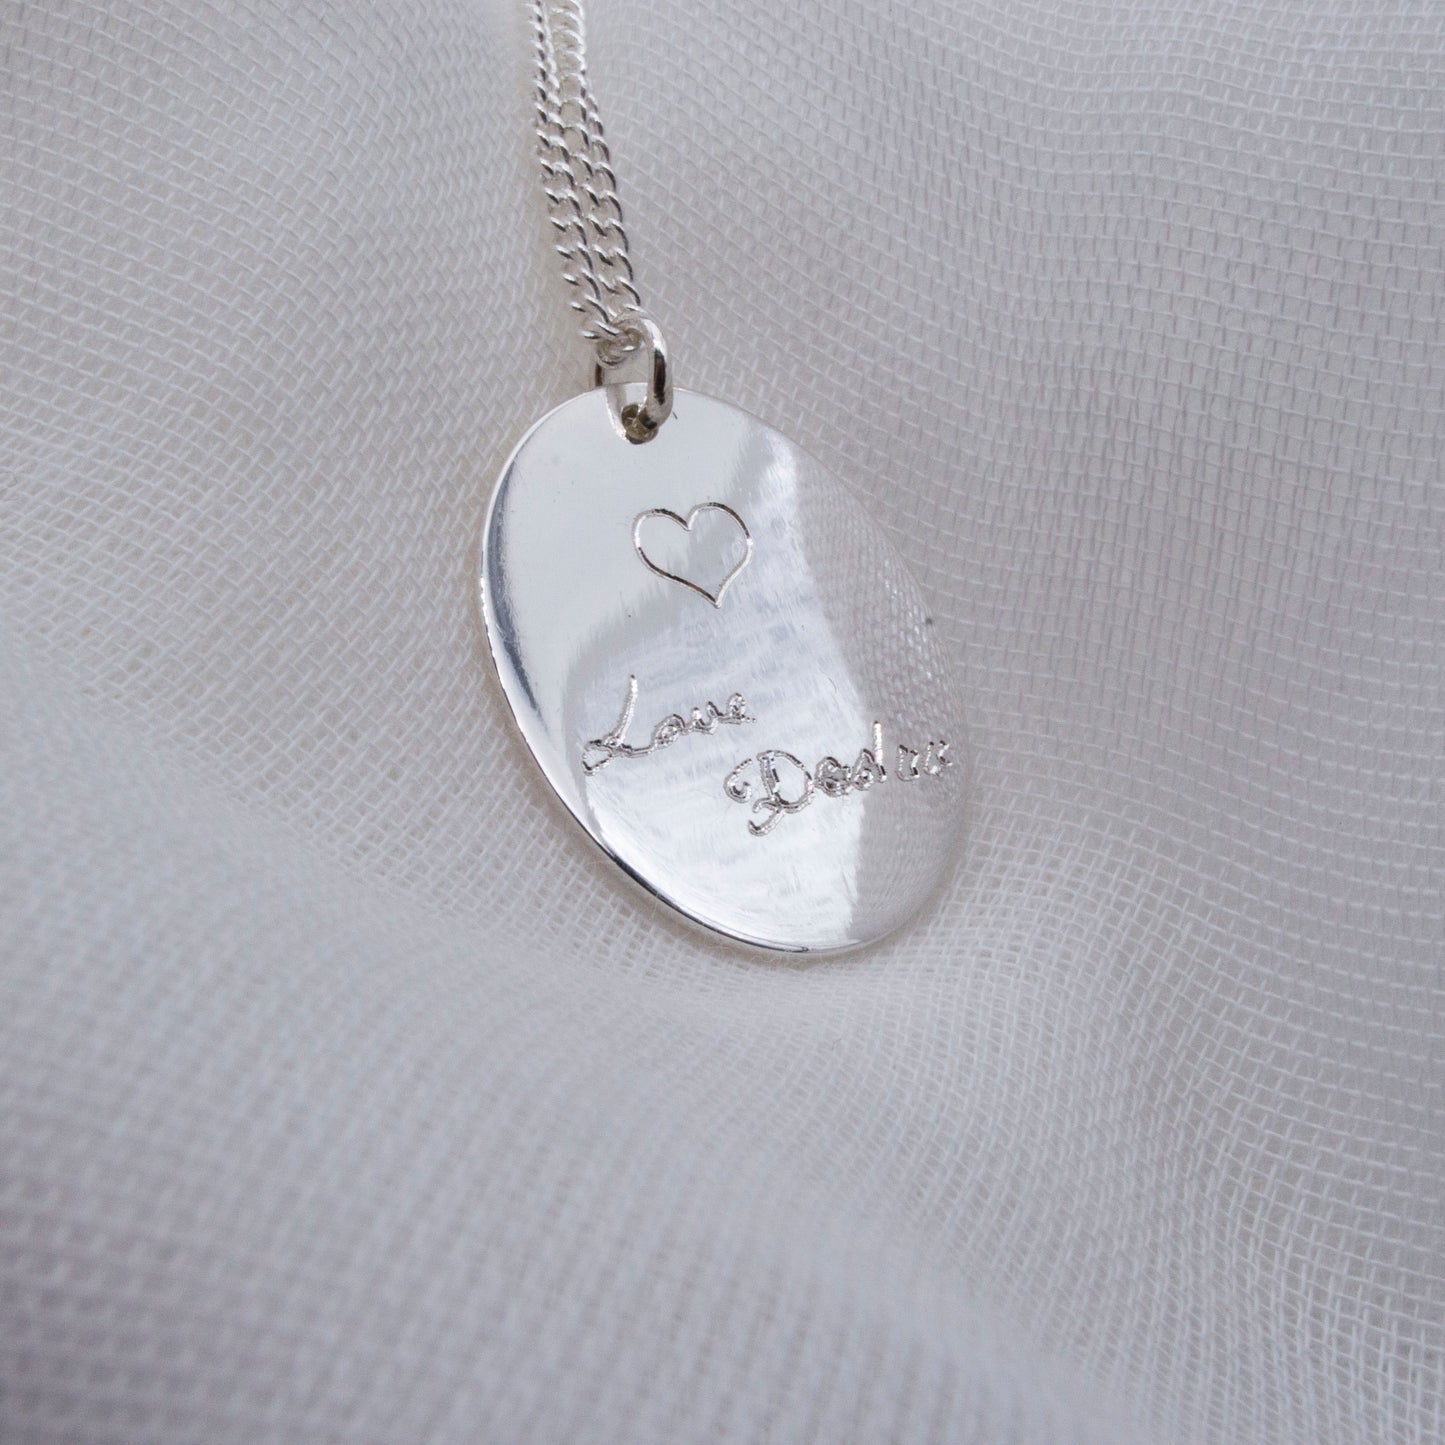 Handwriting pendant necklace in sterling silver - Oval